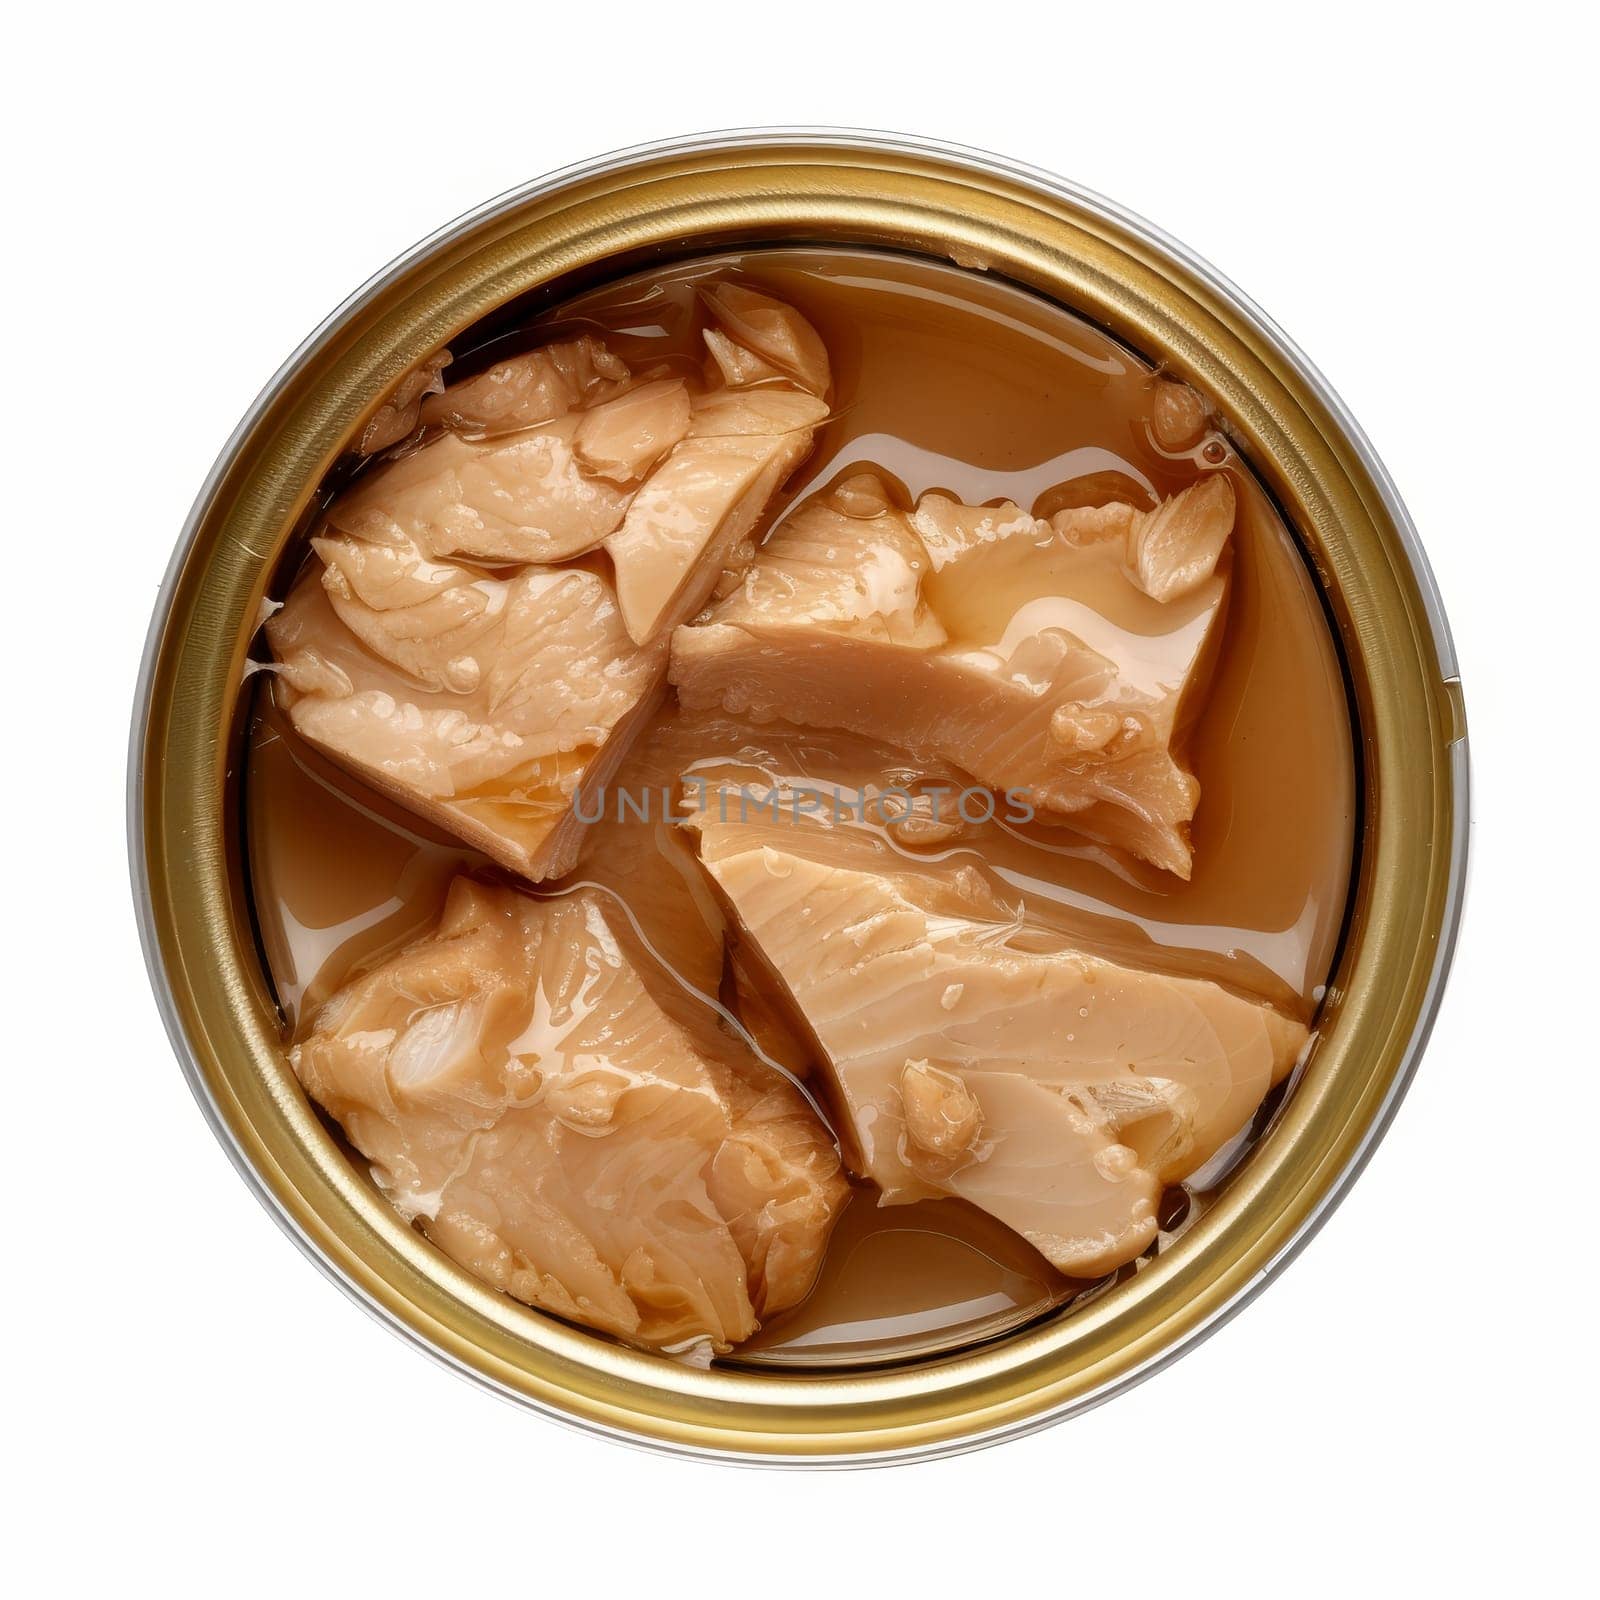 Overhead view of an open can showing chunks of tuna fish preserved in oil, set against a clean white background.